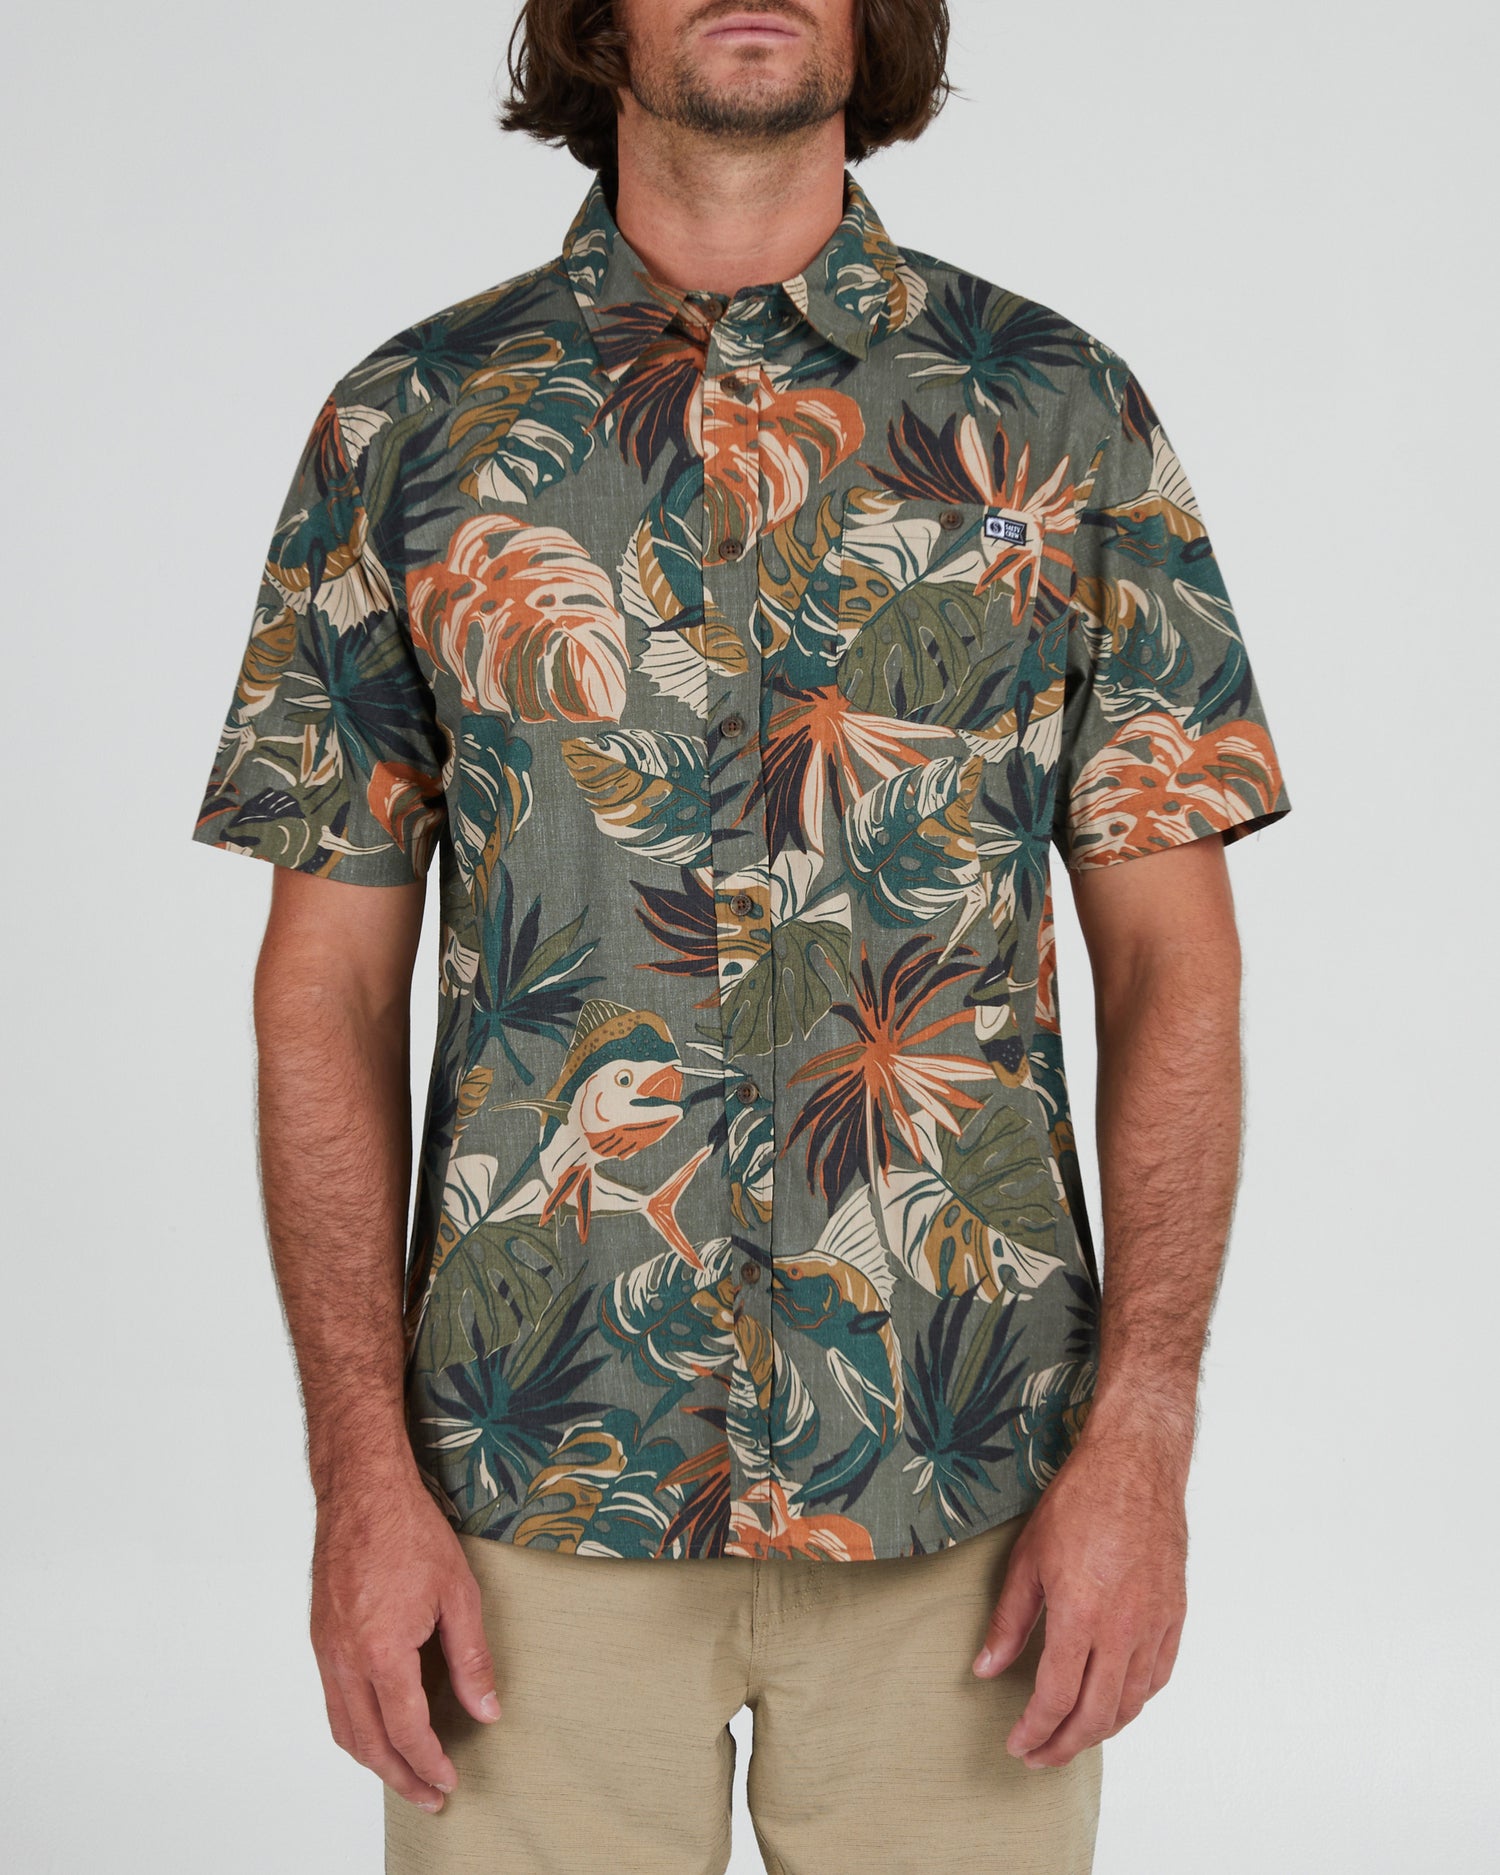 On body front of the Large Kine Olive S/S Woven